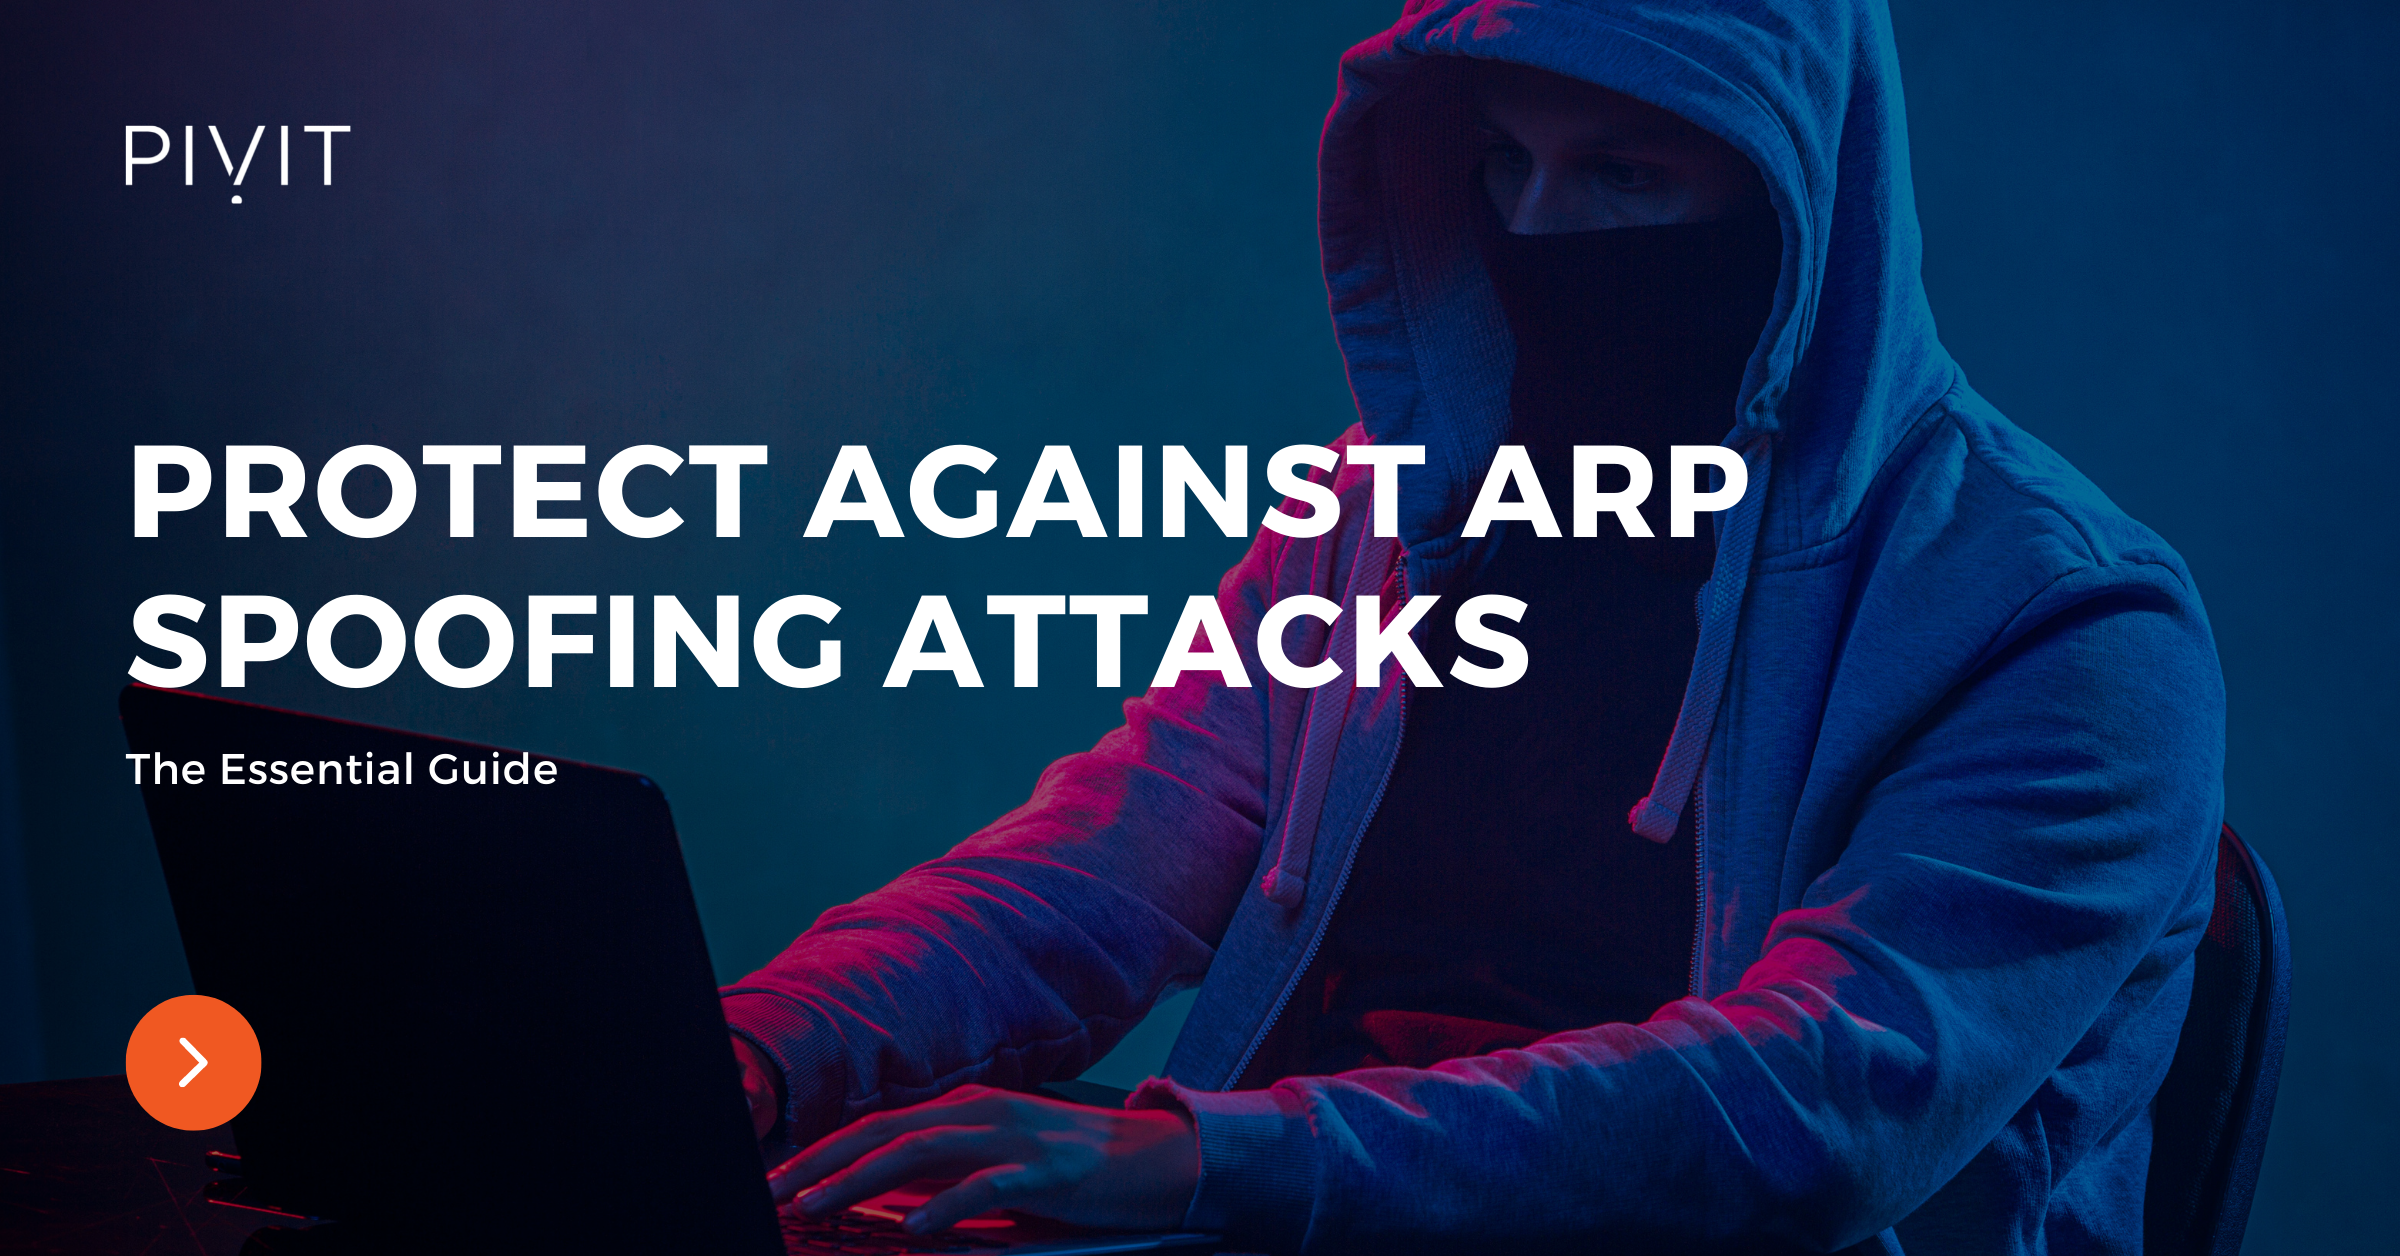 The Essential Guide To Protect Against ARP Spoofing Attacks